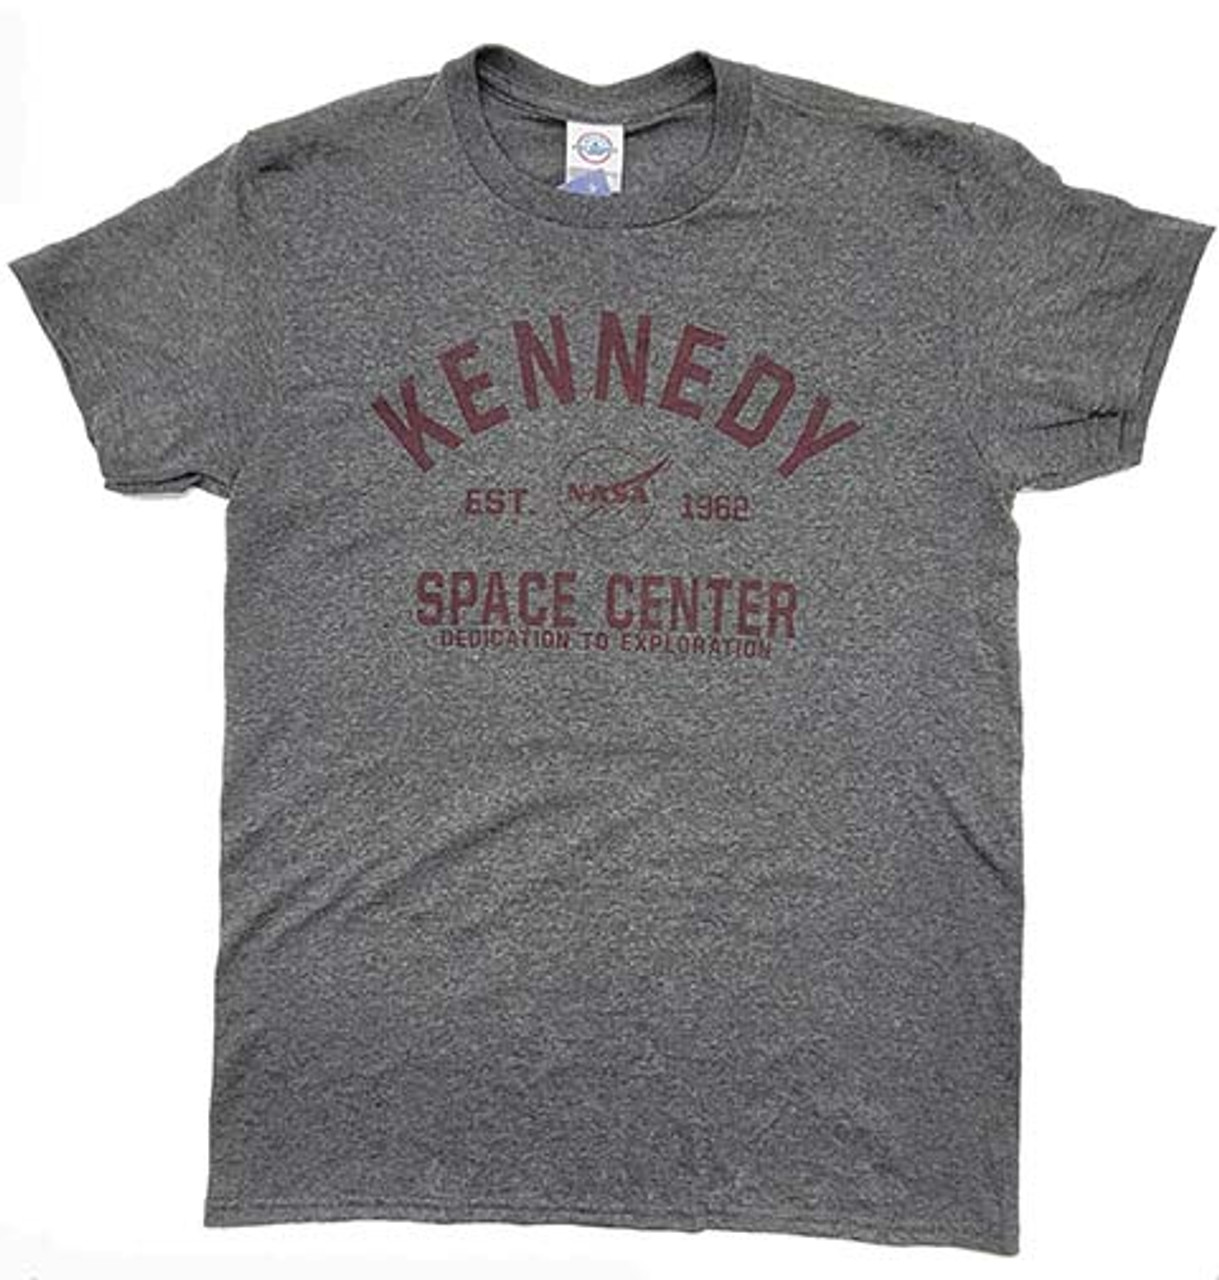 Kennedy Space Center Est. 1962 Charcoal - Tee